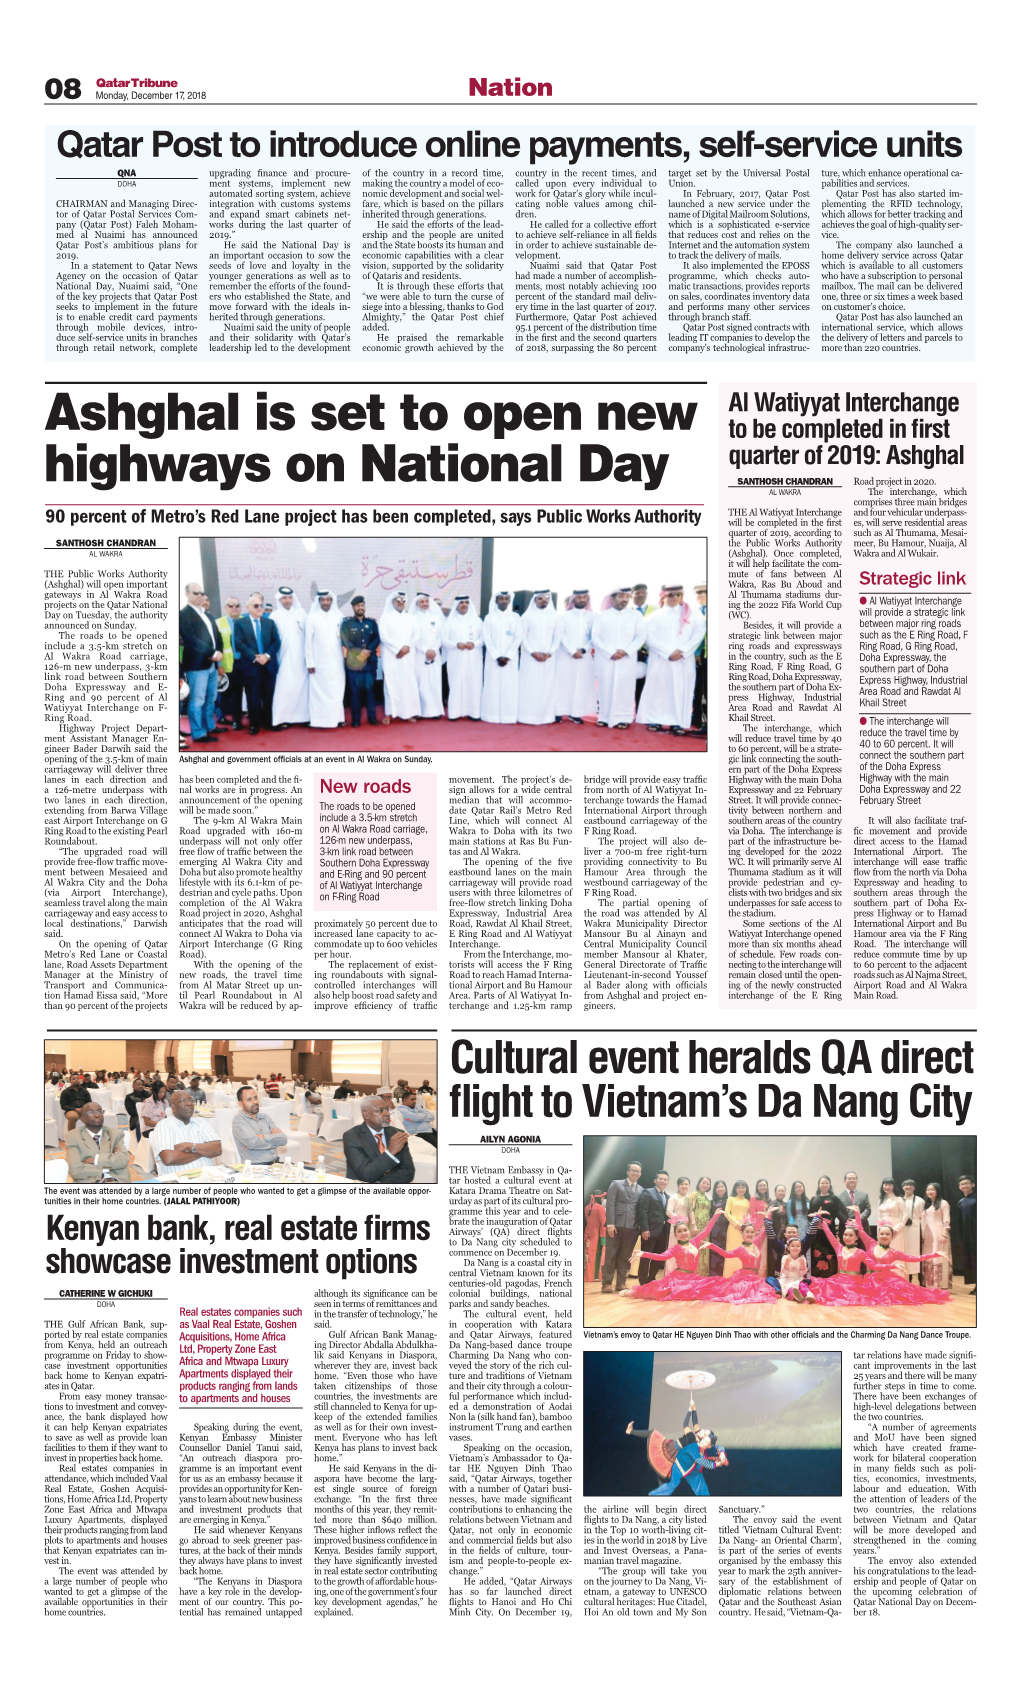 Ashghal Is Set to Open New Highways on National